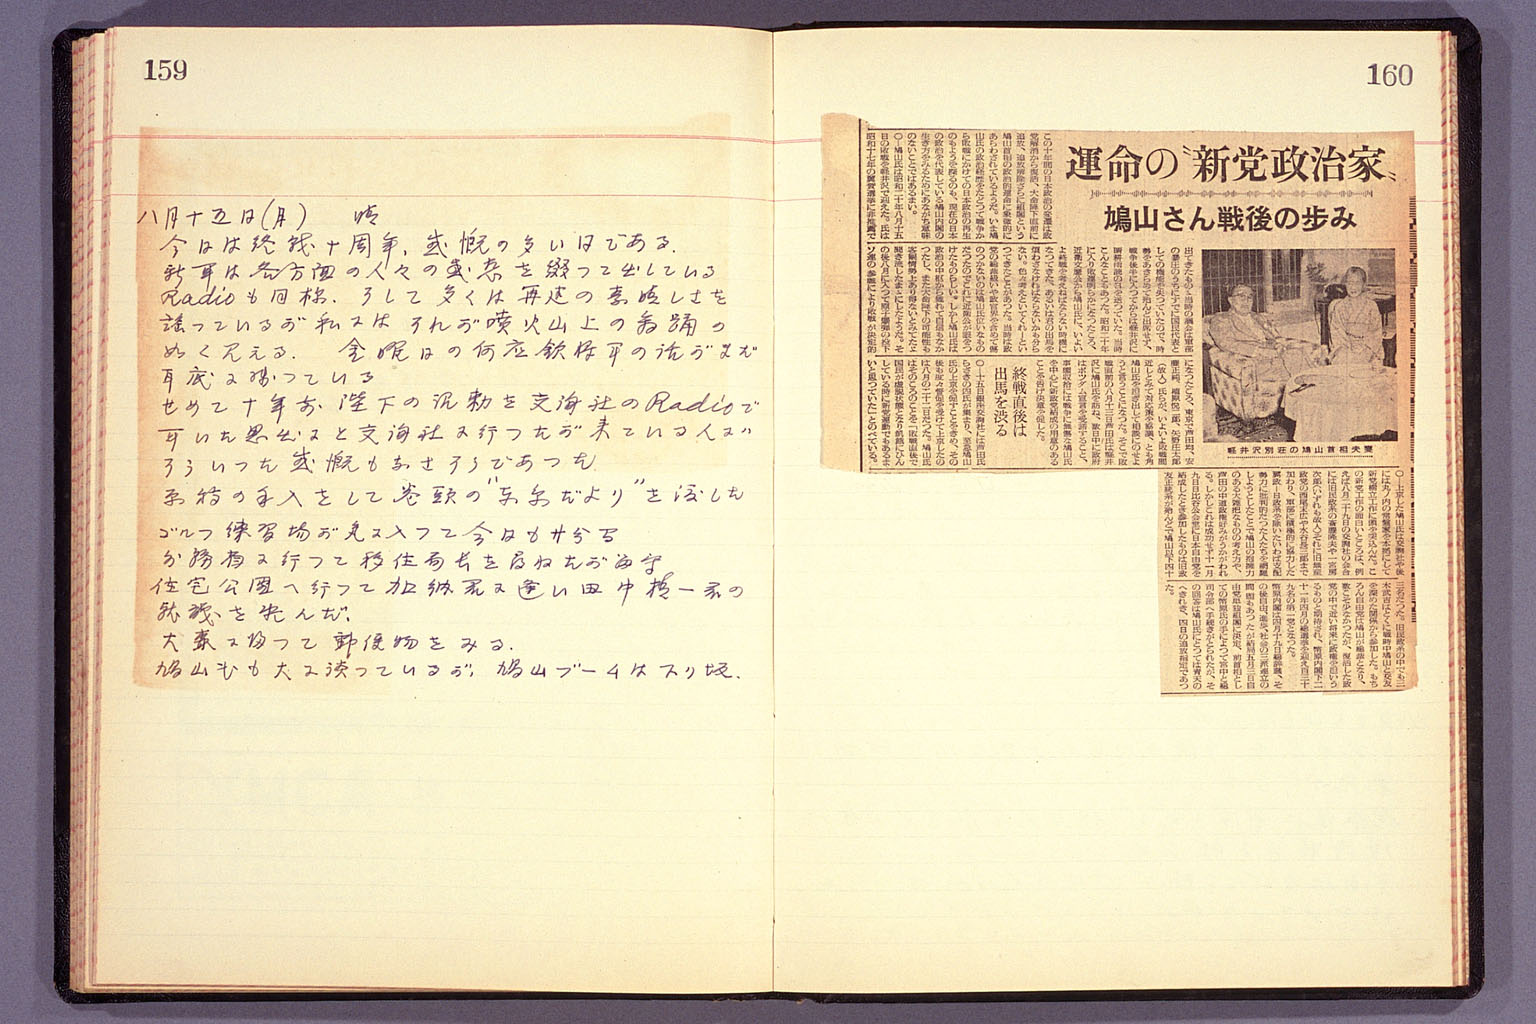 Diary from the end of March 1955 to September 15, 1955 (larger)